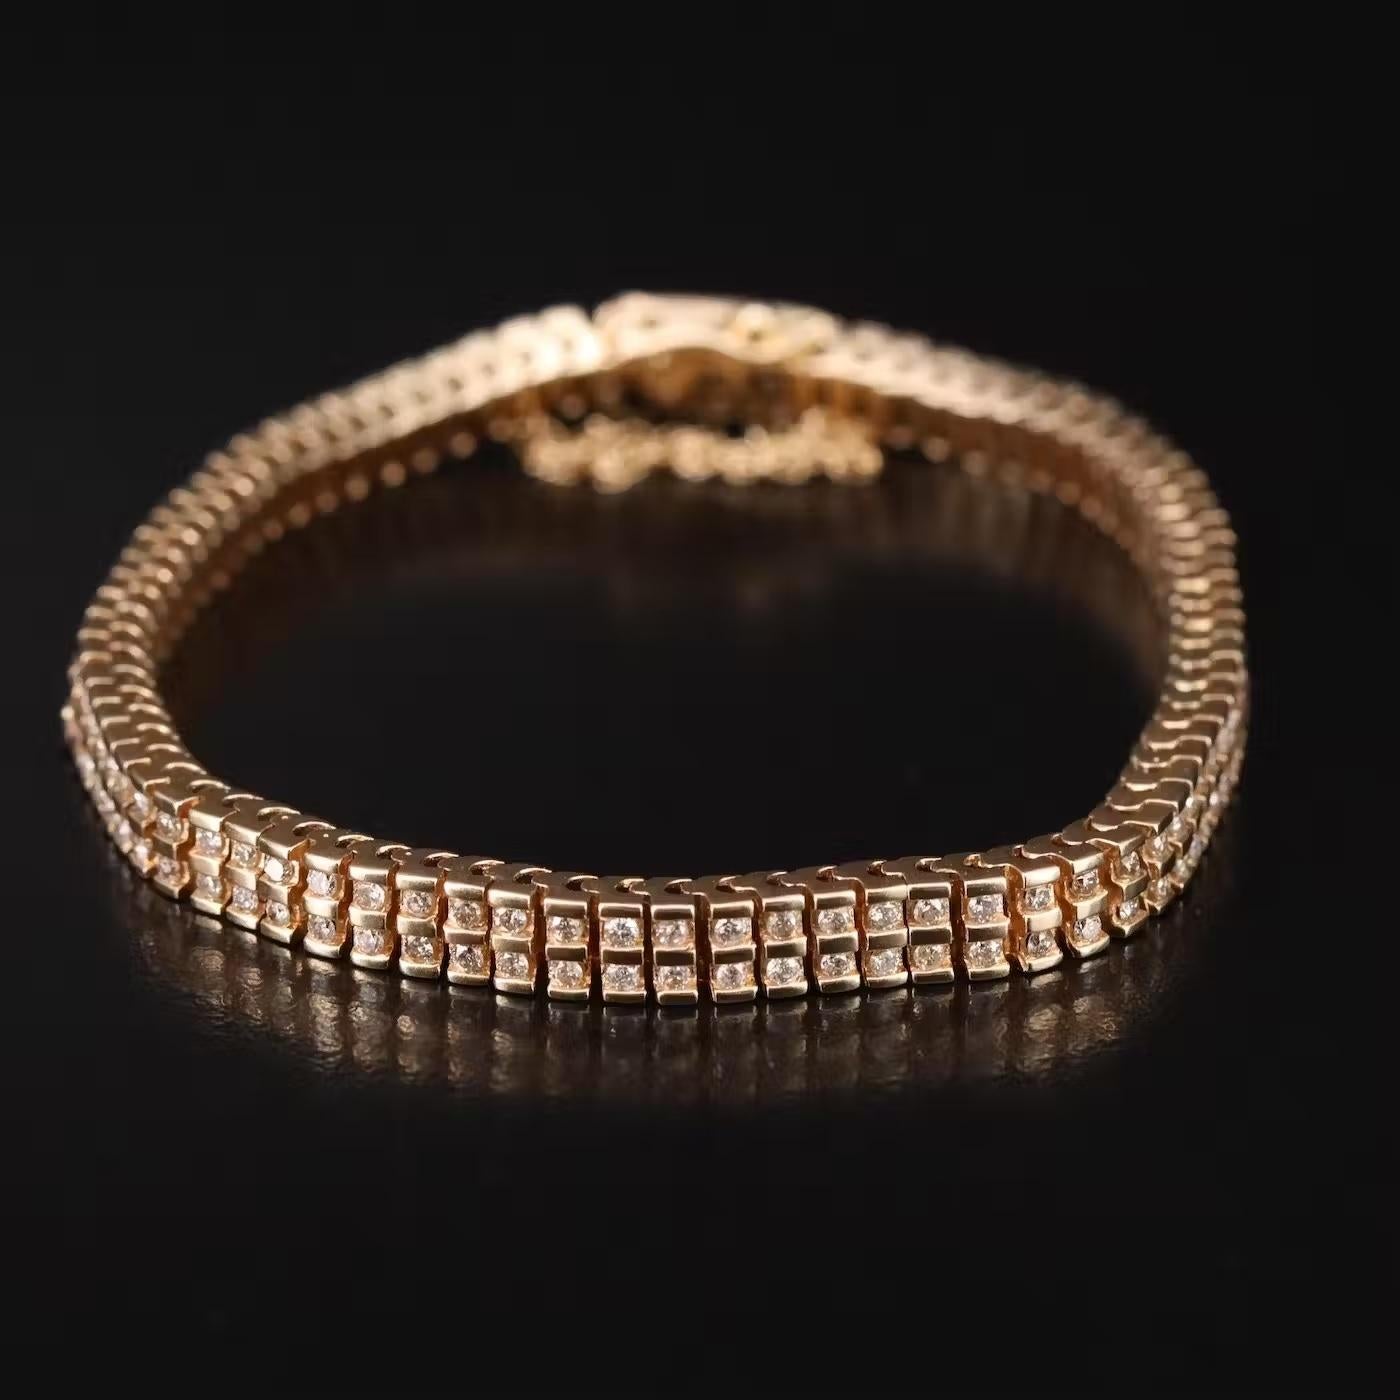 Designer Double Raw Line Bracelet, HALLMARKS: BV  

Absolute luxury

New with tags,  retail price on Tags $12500

2 CWT sparkly natural Diamond

14K gold, weight is 18.4 grams 

The bracelet length is 6.75 inches

It comes with a safety chain 